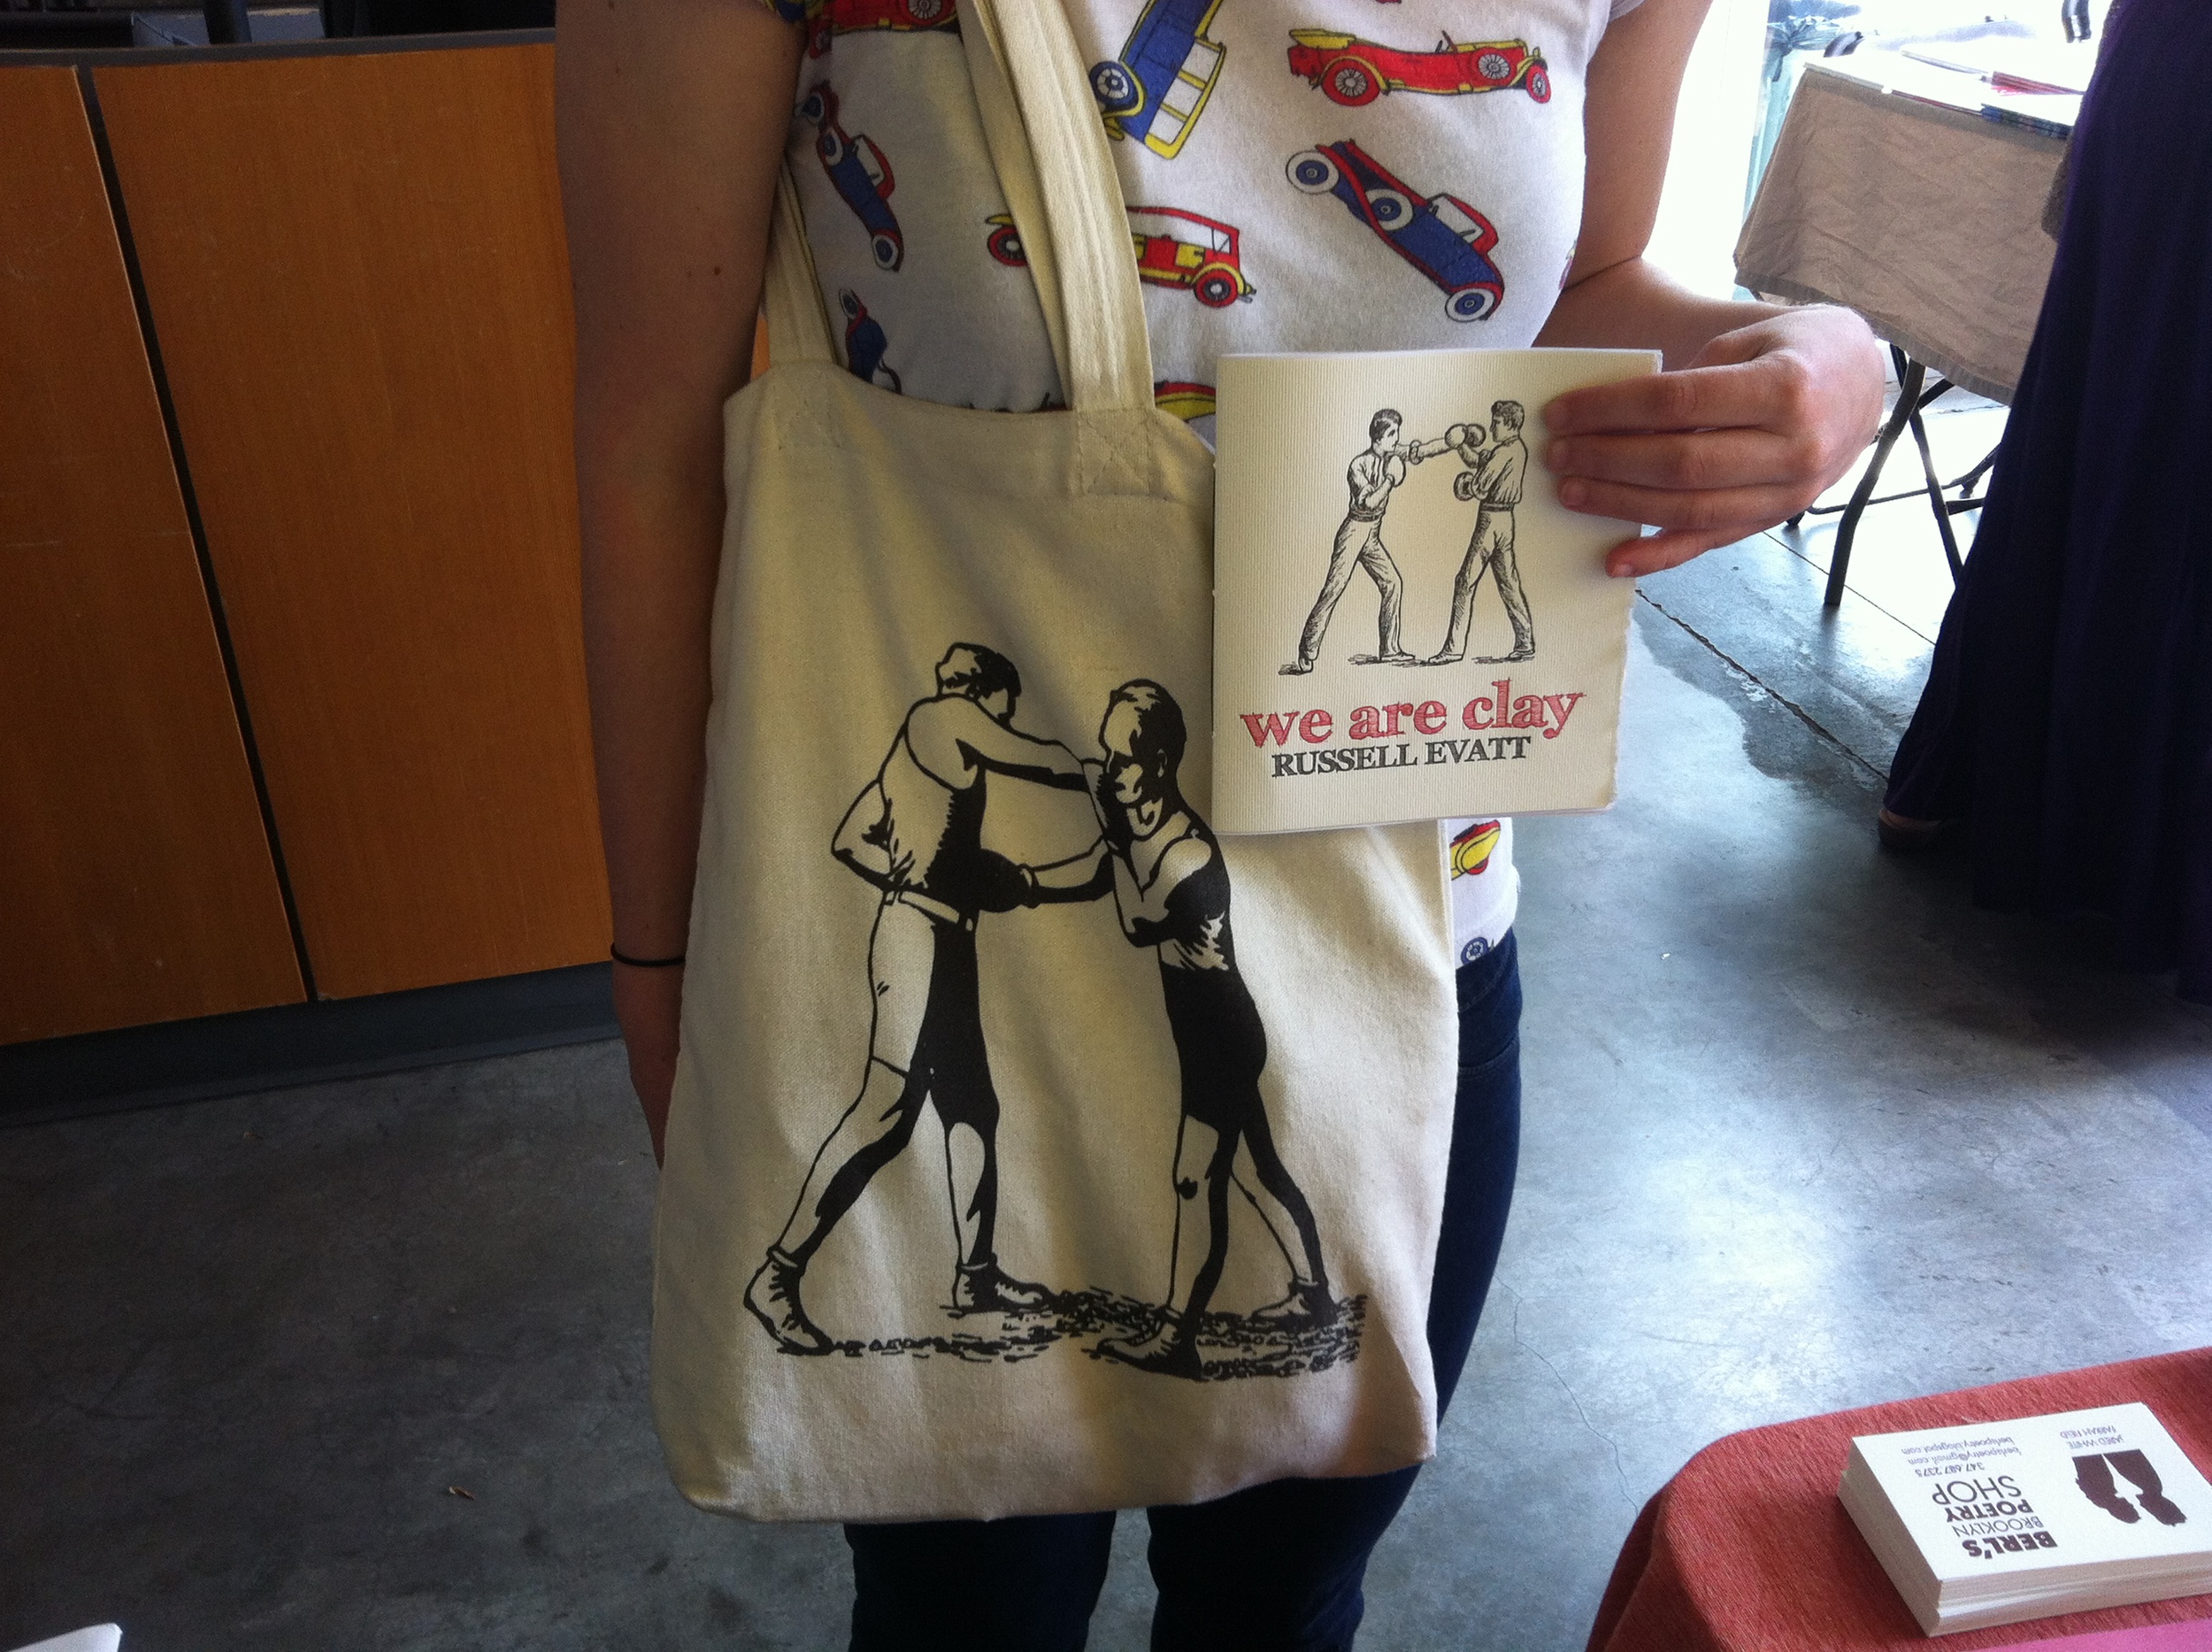  A tote at the Brooklyn Flea with an uncanny resemblance to WE ARE CLAY by Russell Evatt (Epiphany Editions 